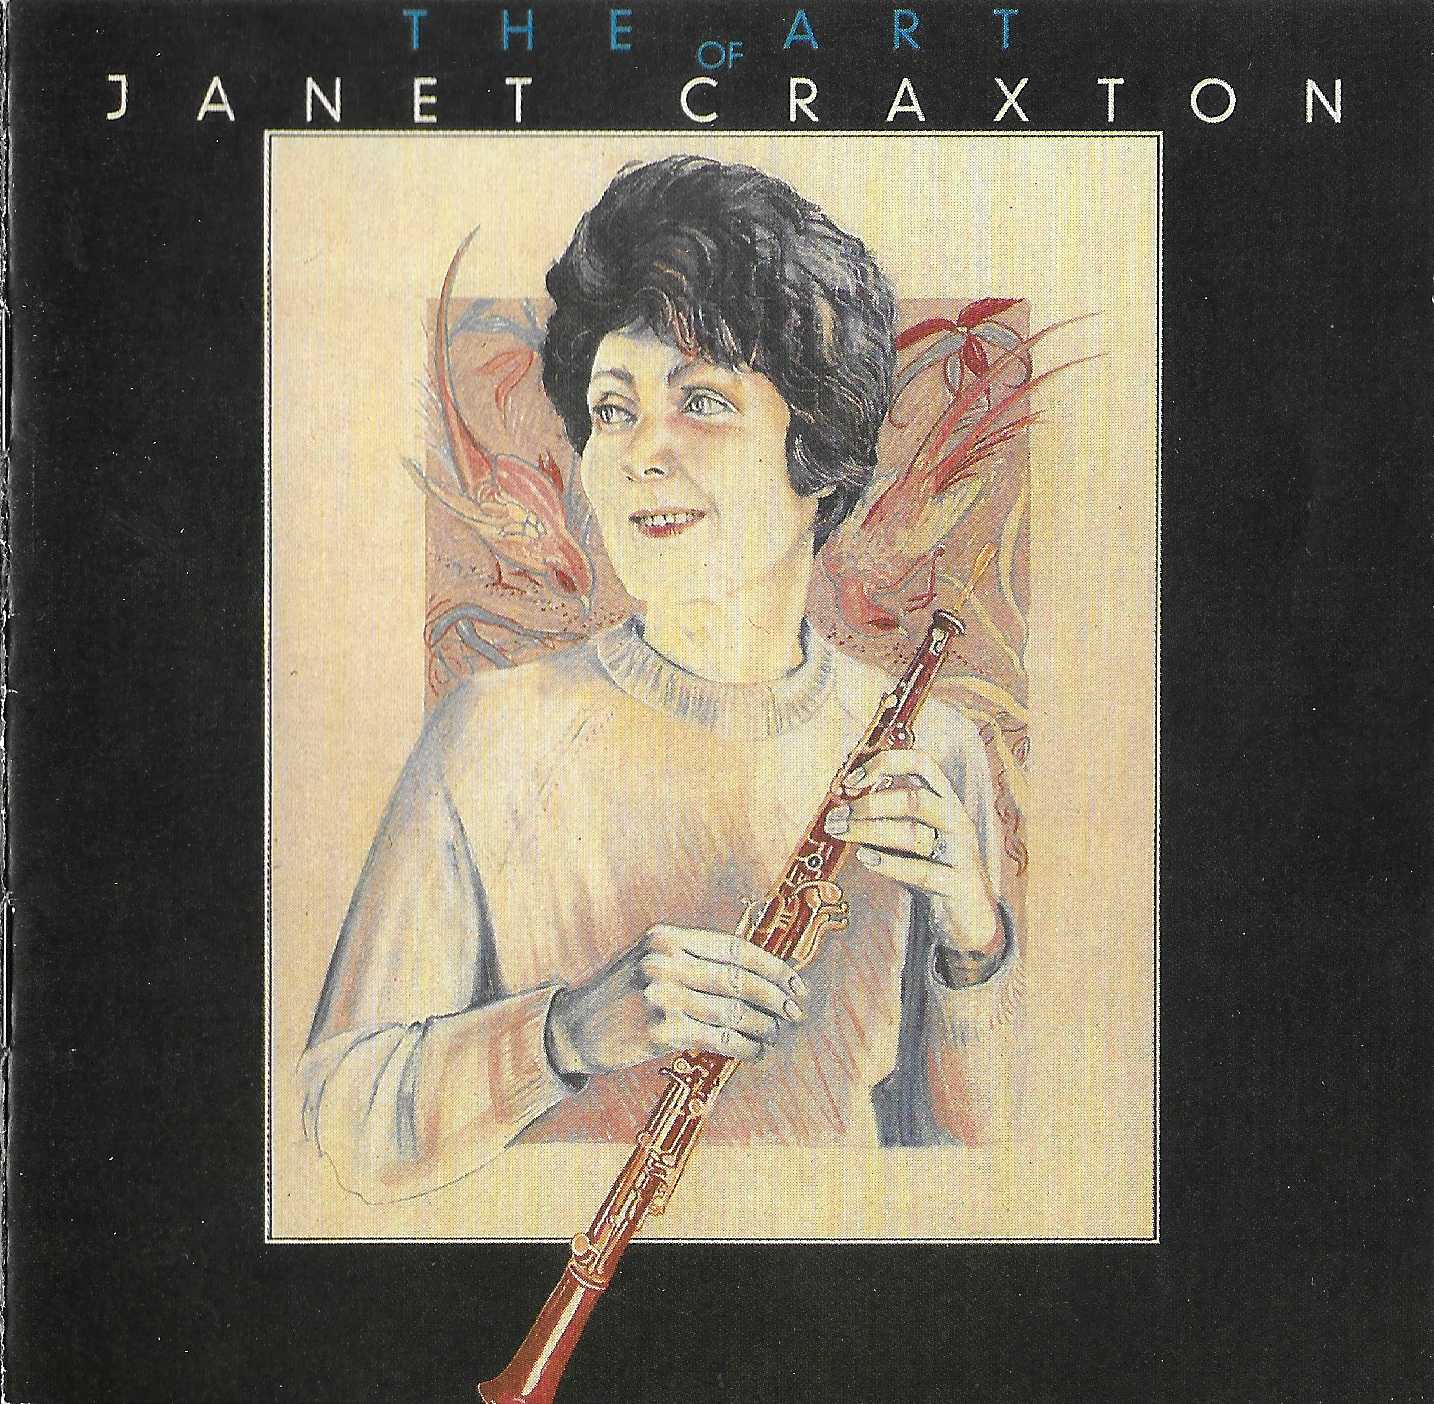 Picture of The art of Janet Craxton by artist Janet Craxton from the BBC cds - Records and Tapes library